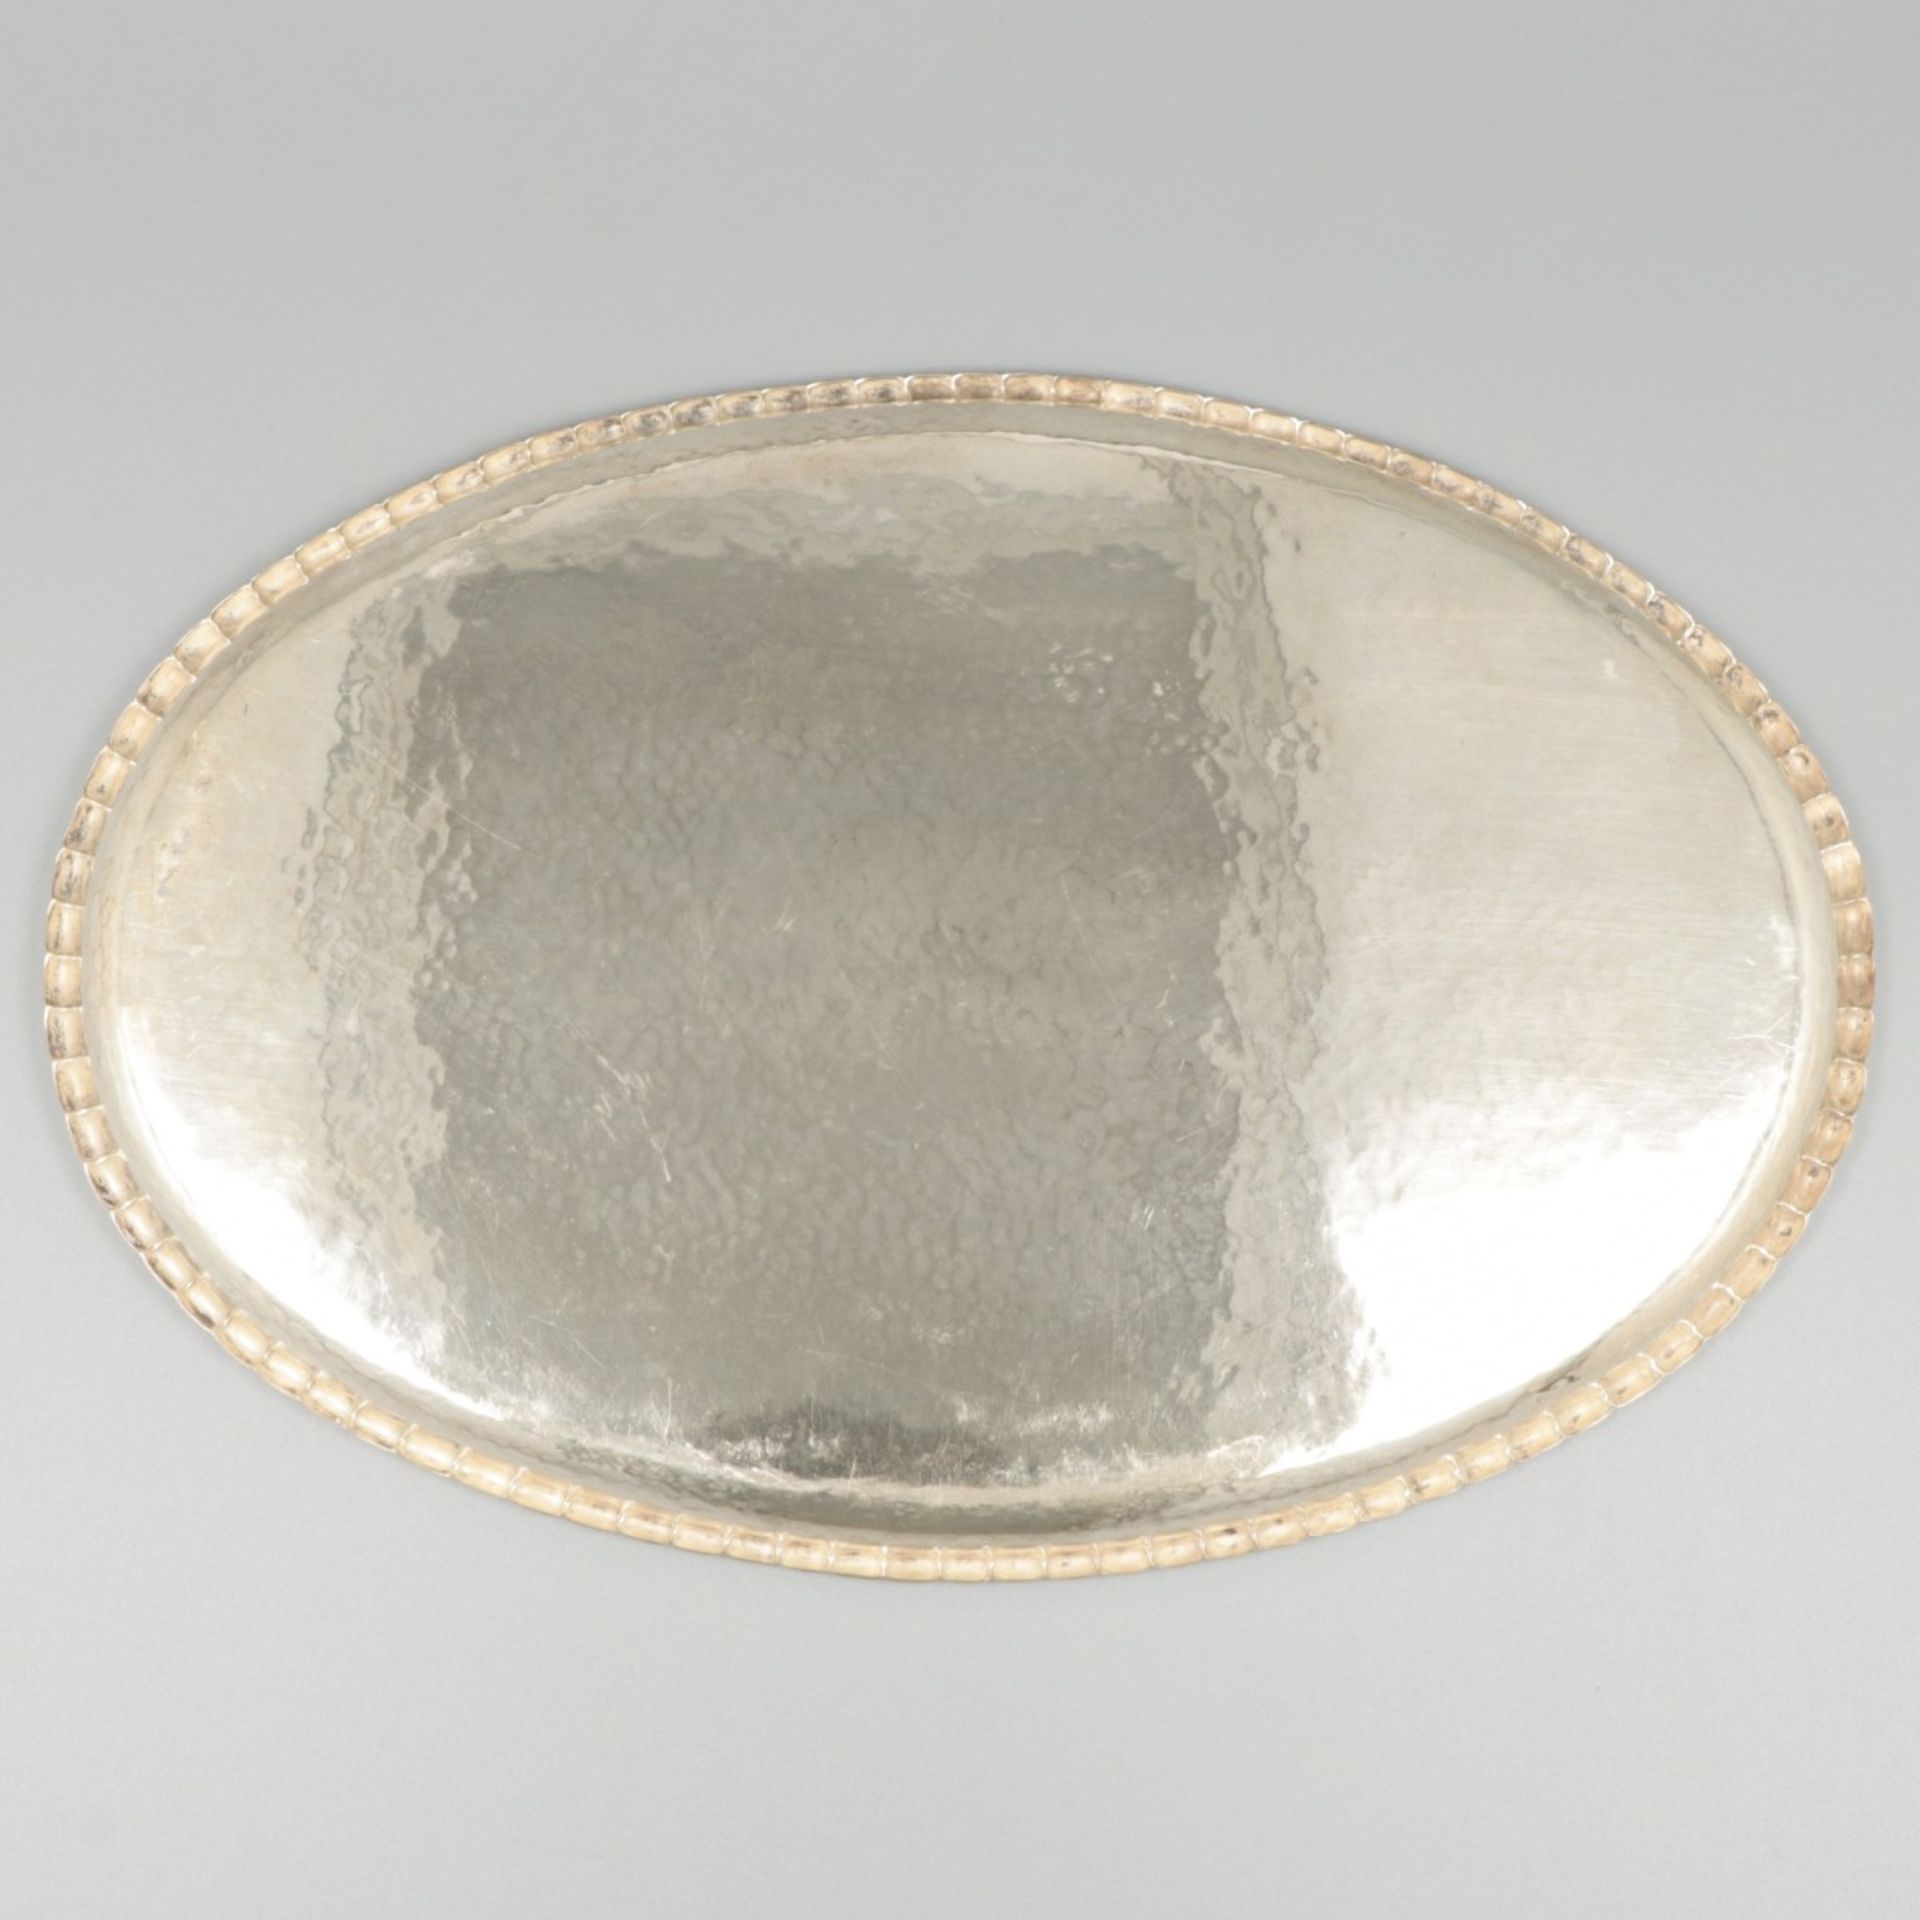 Serving tray silver. - Image 4 of 5